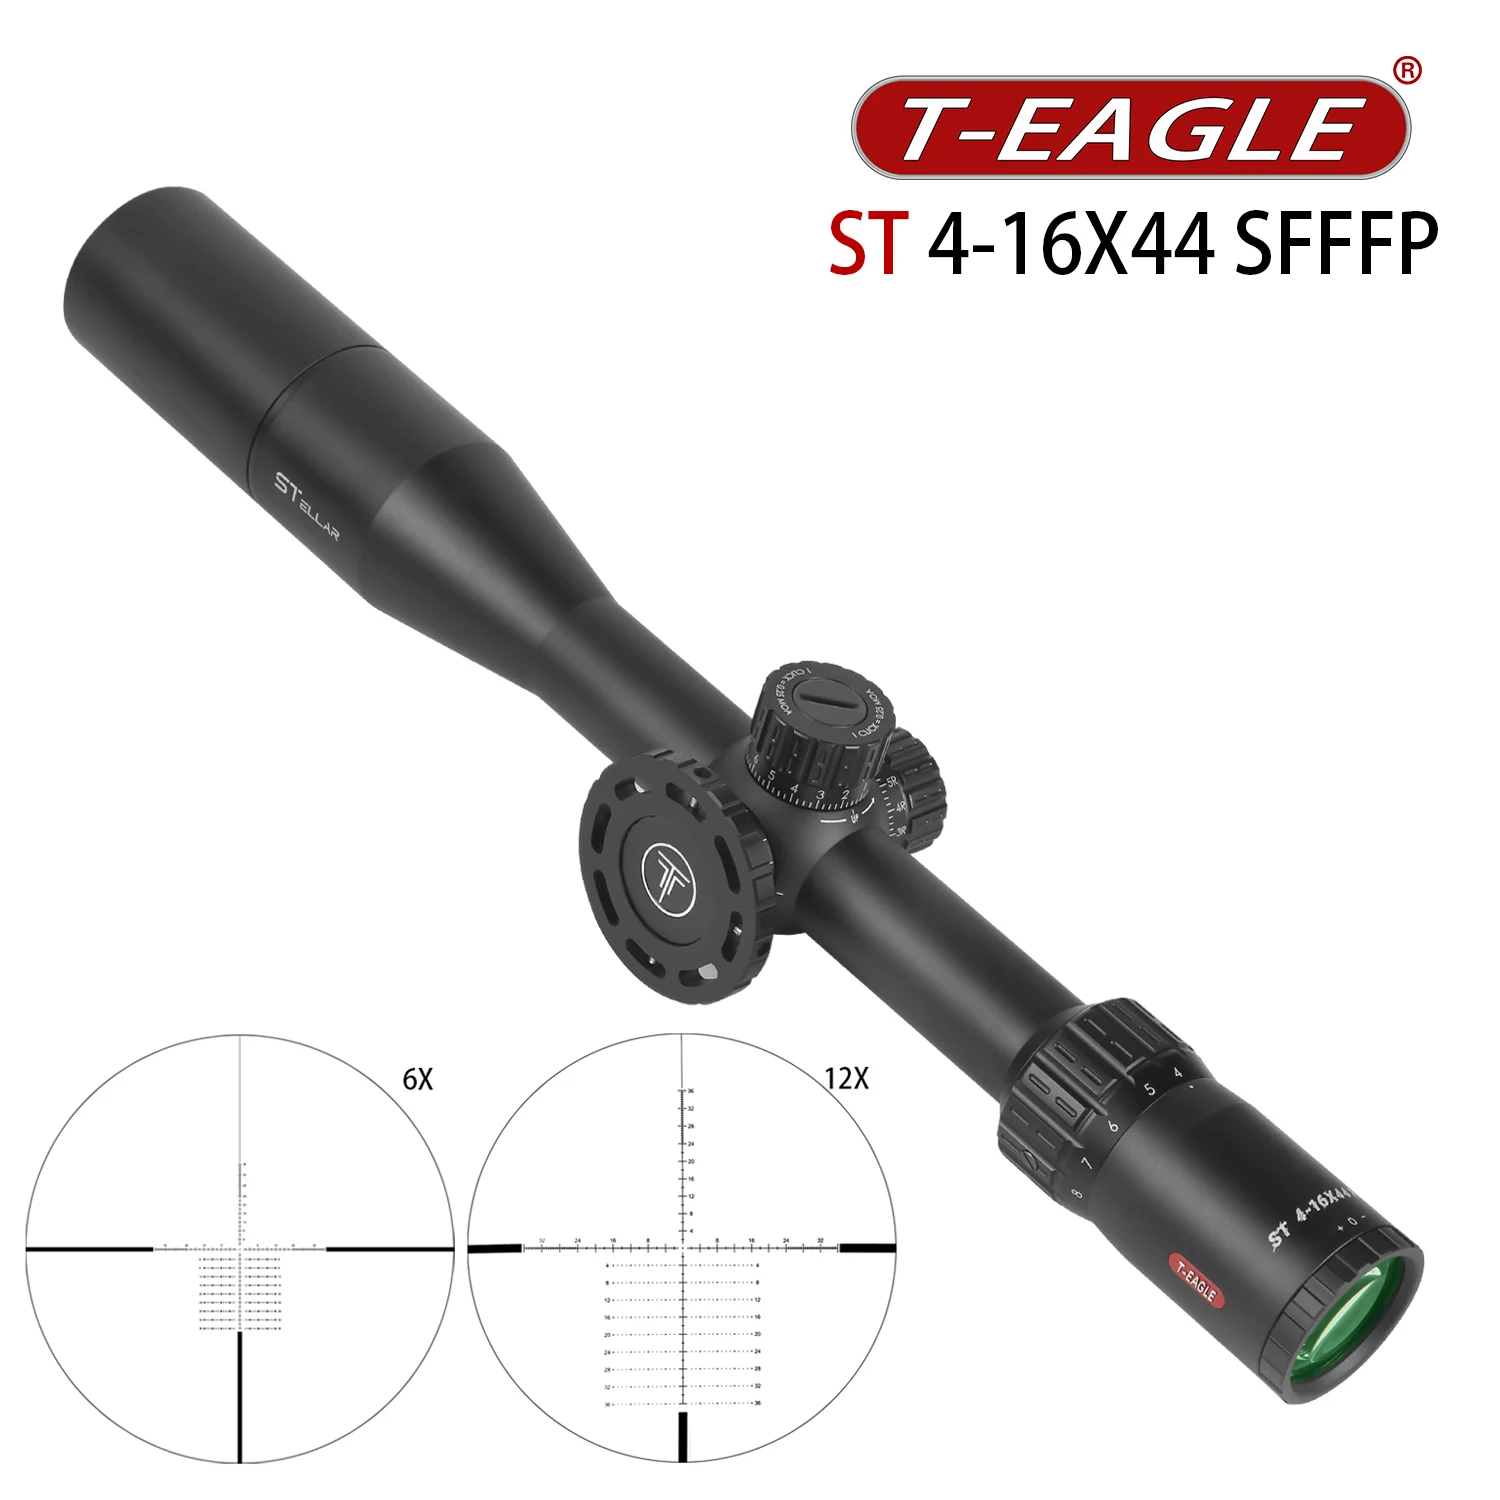 

T-EAGLE ST 4-16X44 SFFFP Tactical Riflescope Spotting Rifle Scope for Hunting PCP Air Gun Optical Collimator Sight Fit . 308